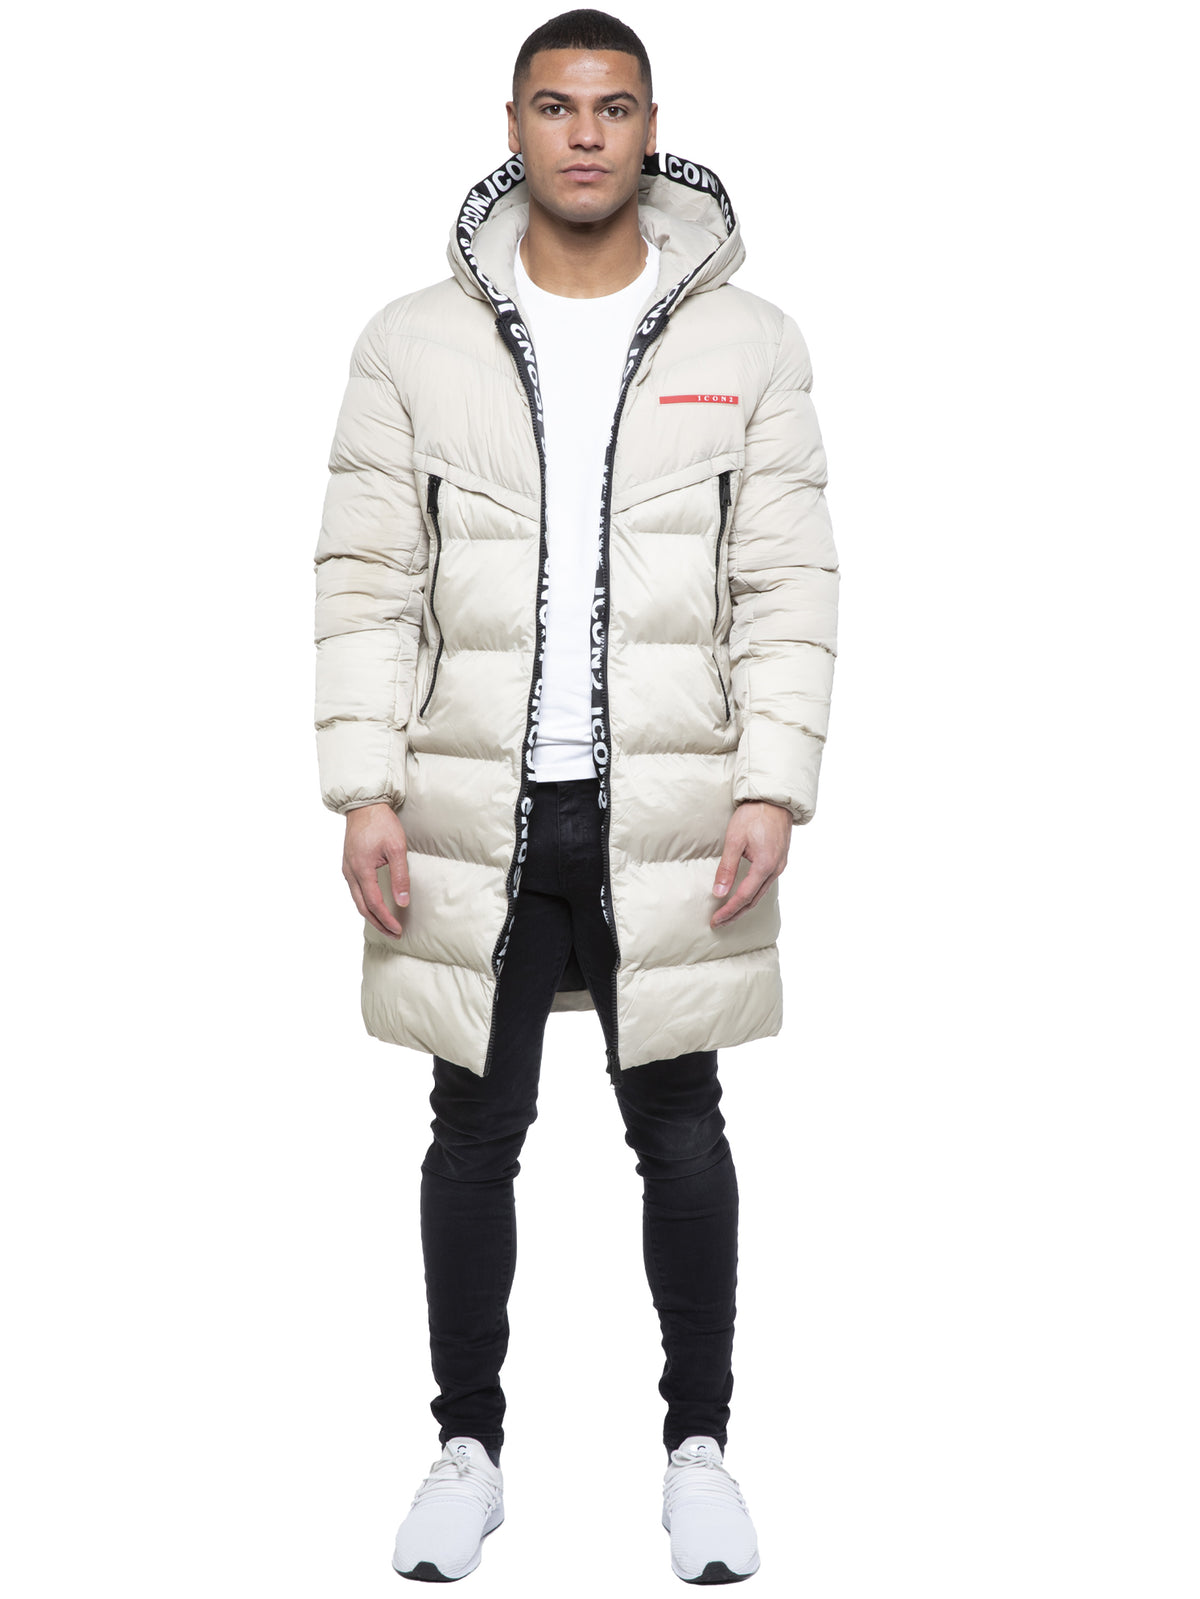 ICON LONG JACKET Icon Mens Puffer Long Jacket GUEST BRAND RAWDENIM